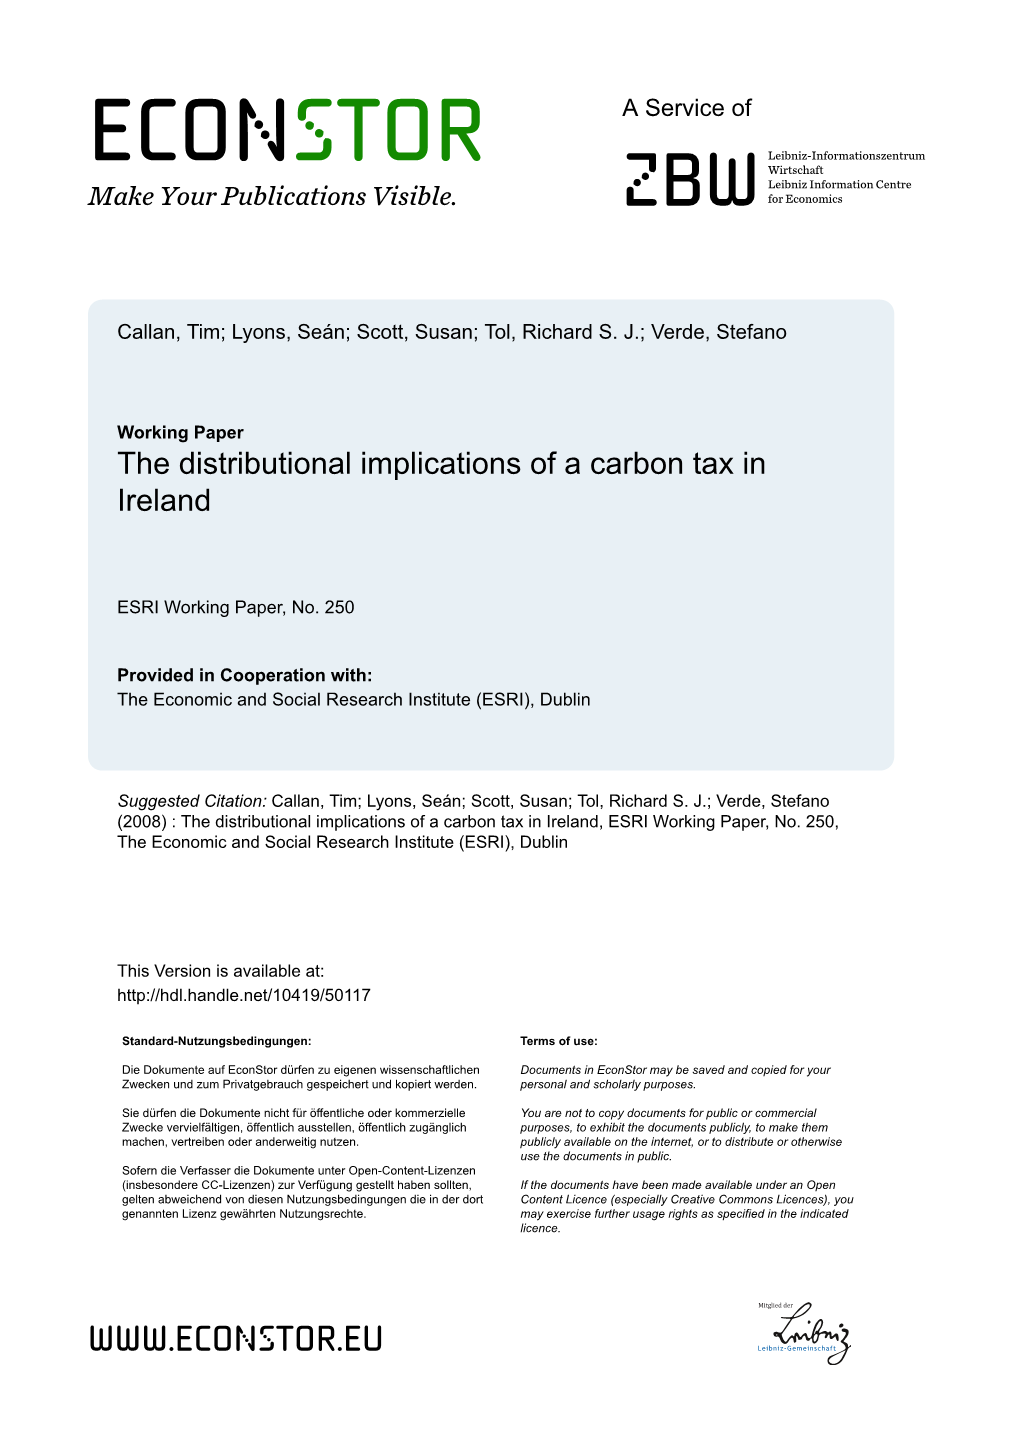 The Distributional Implications of a Carbon Tax in Ireland